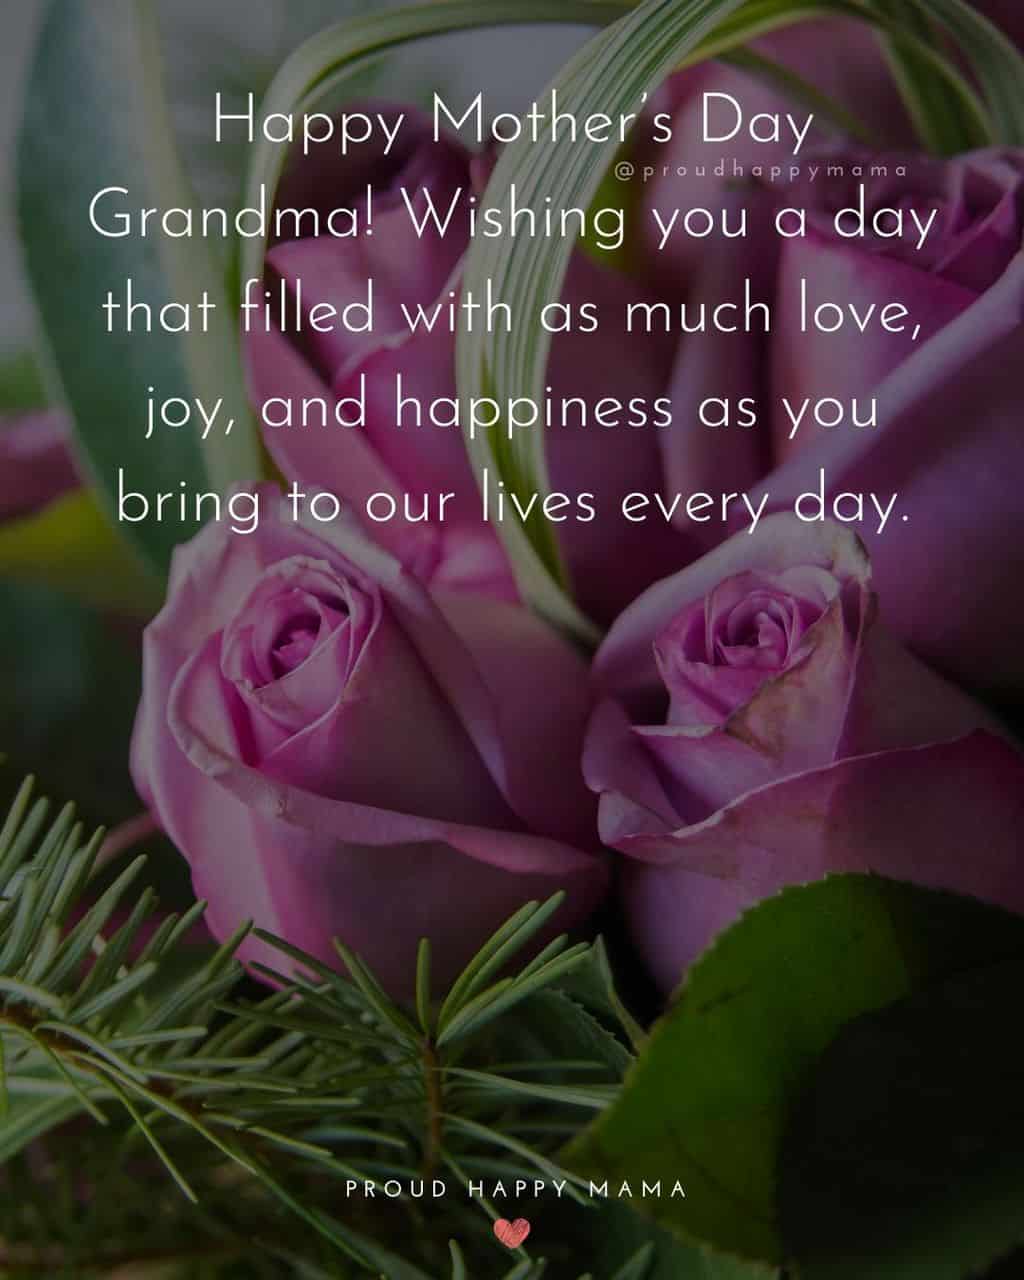 Happy Mothers Day Quotes To Grandma - Happy Mother’s Day Grandma! Wishing you a day that filled with as much love, joy,